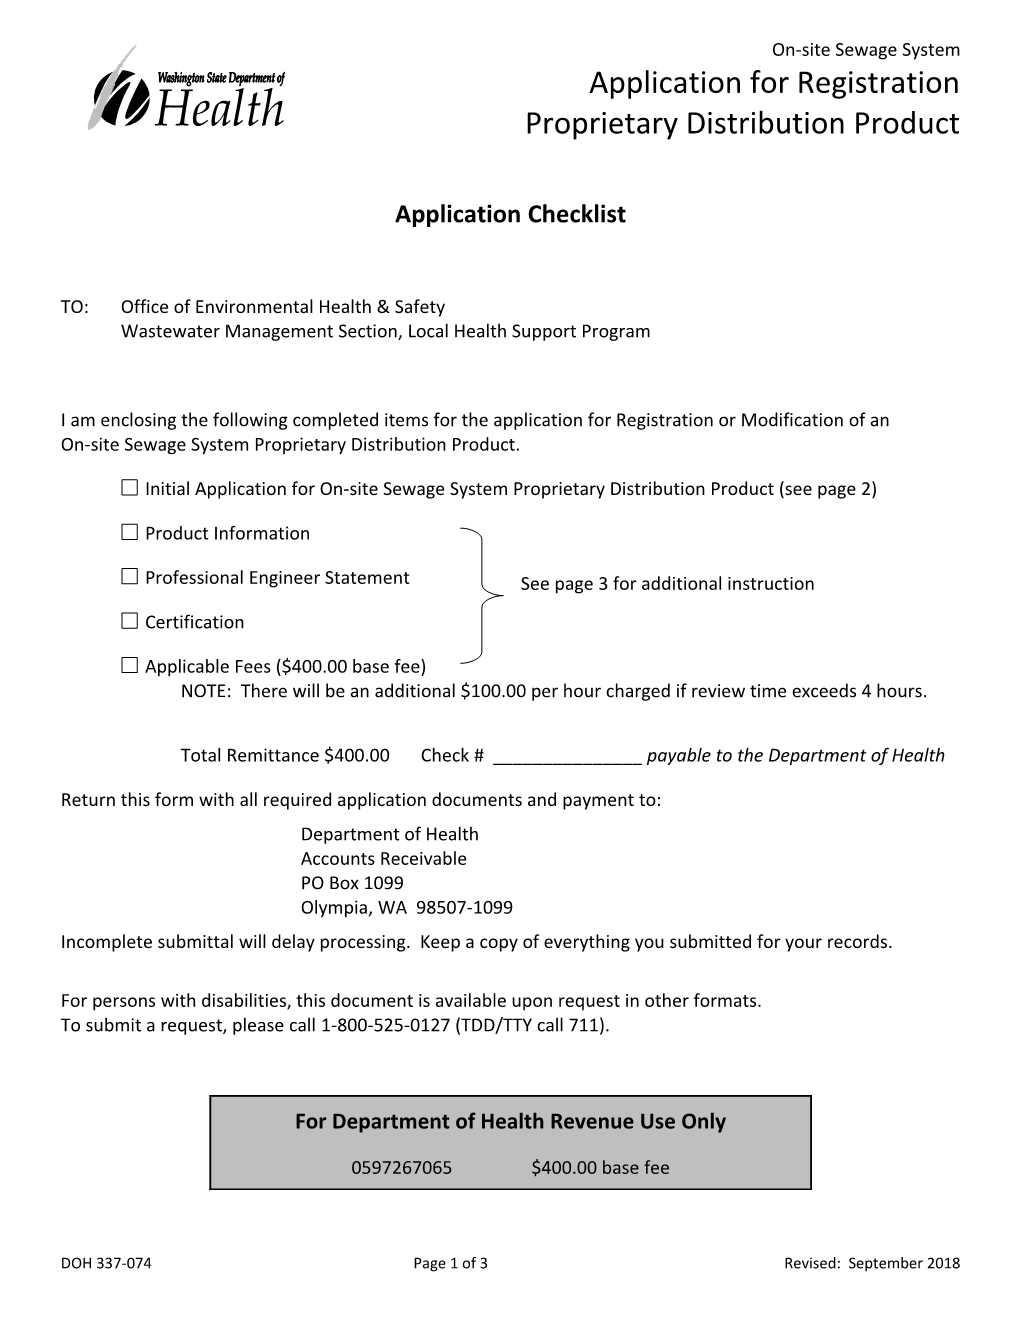 Application for Registration Proprietary Distribution Product